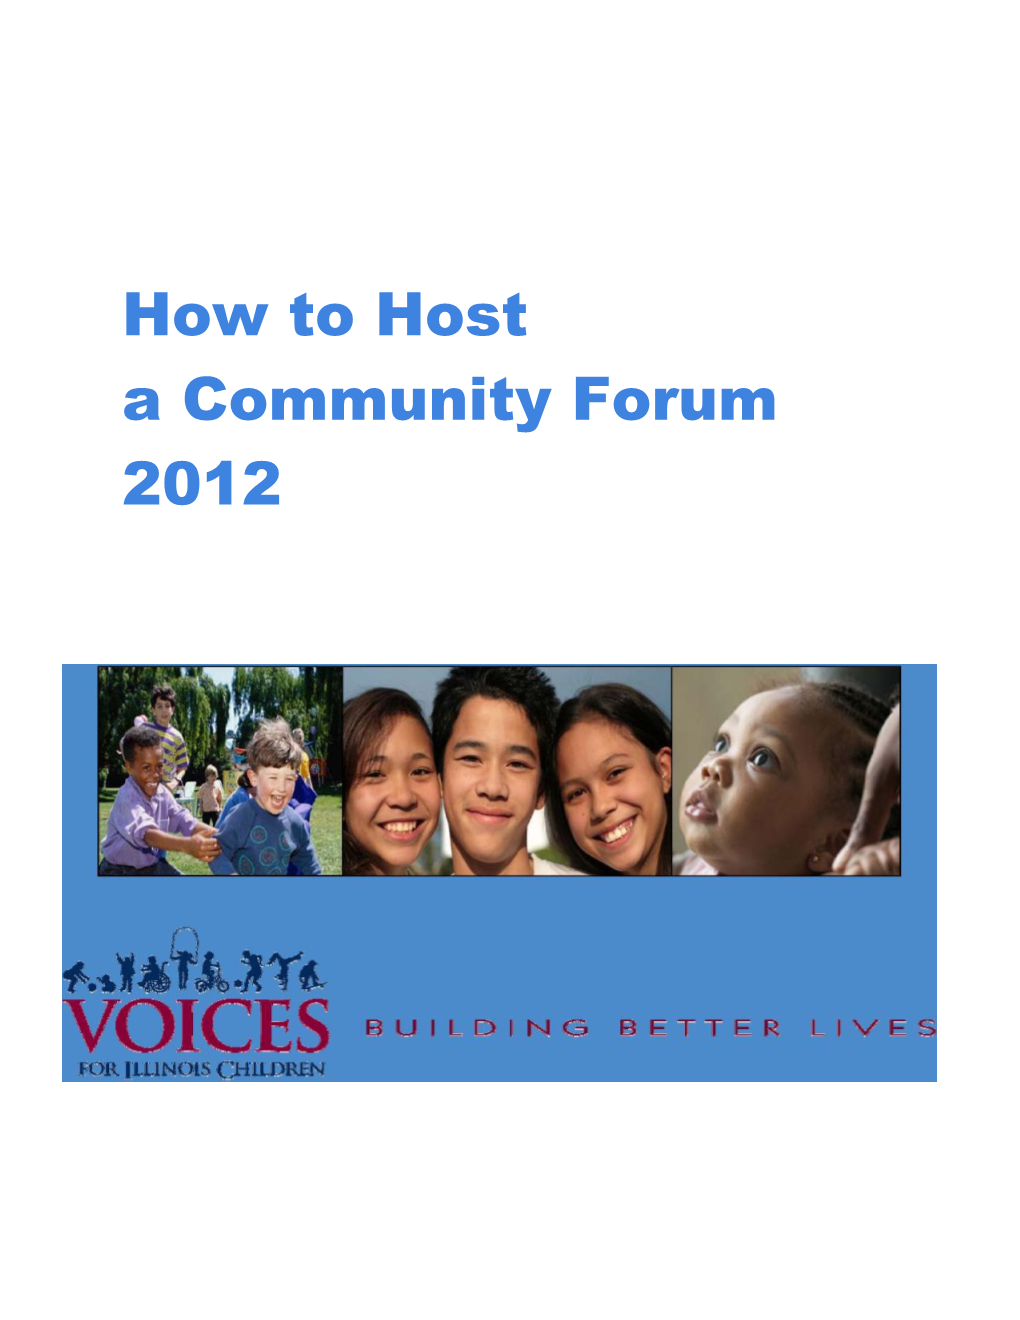 How to Host a Community Forum